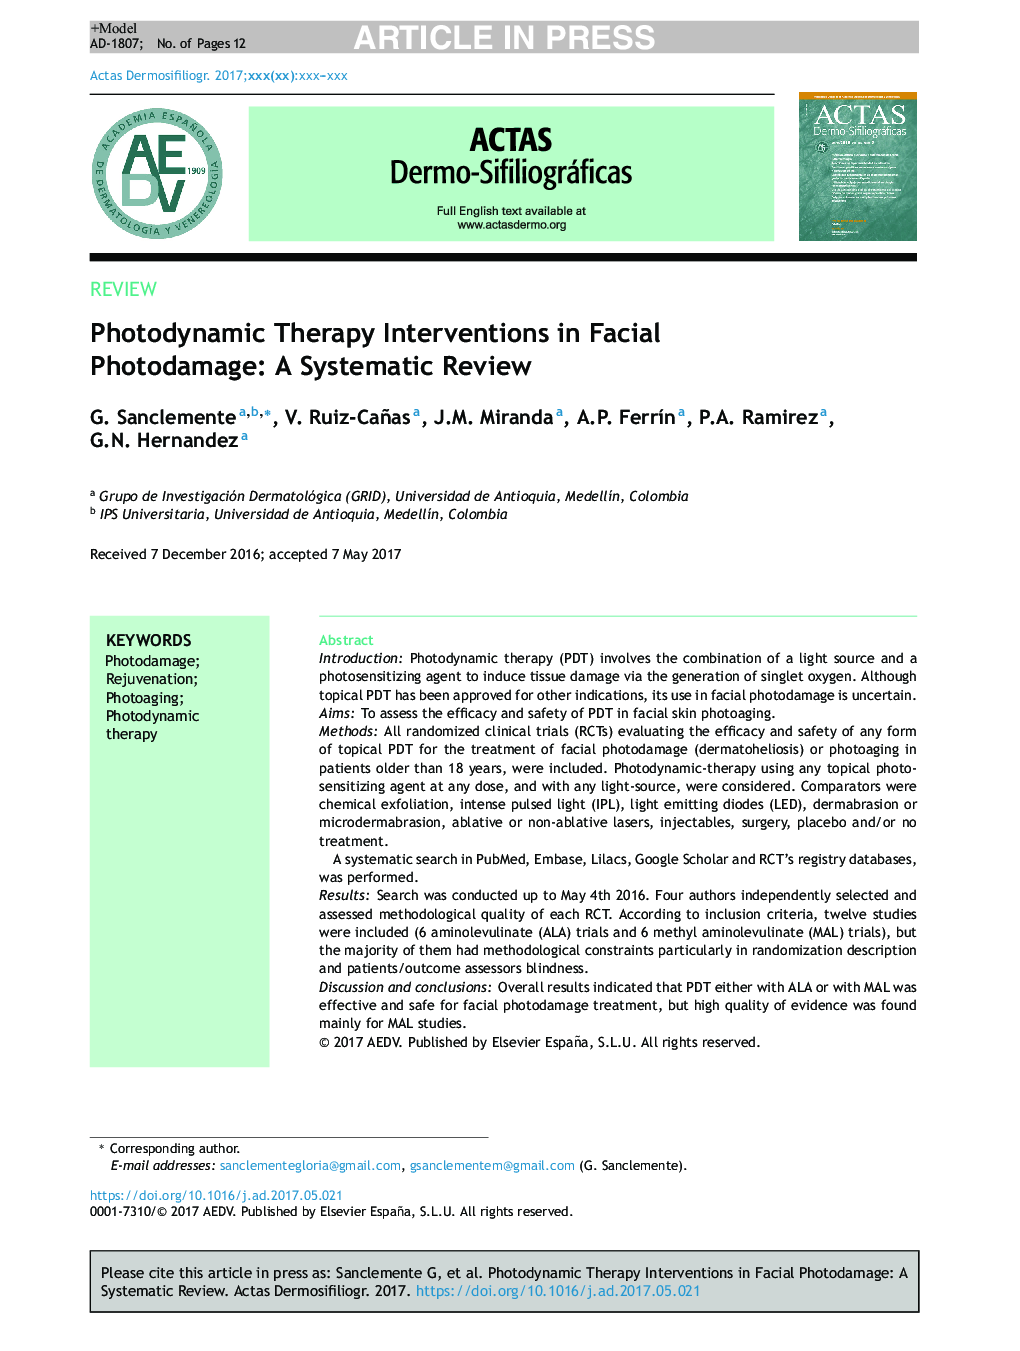 Photodynamic Therapy Interventions in Facial Photodamage: A Systematic Review